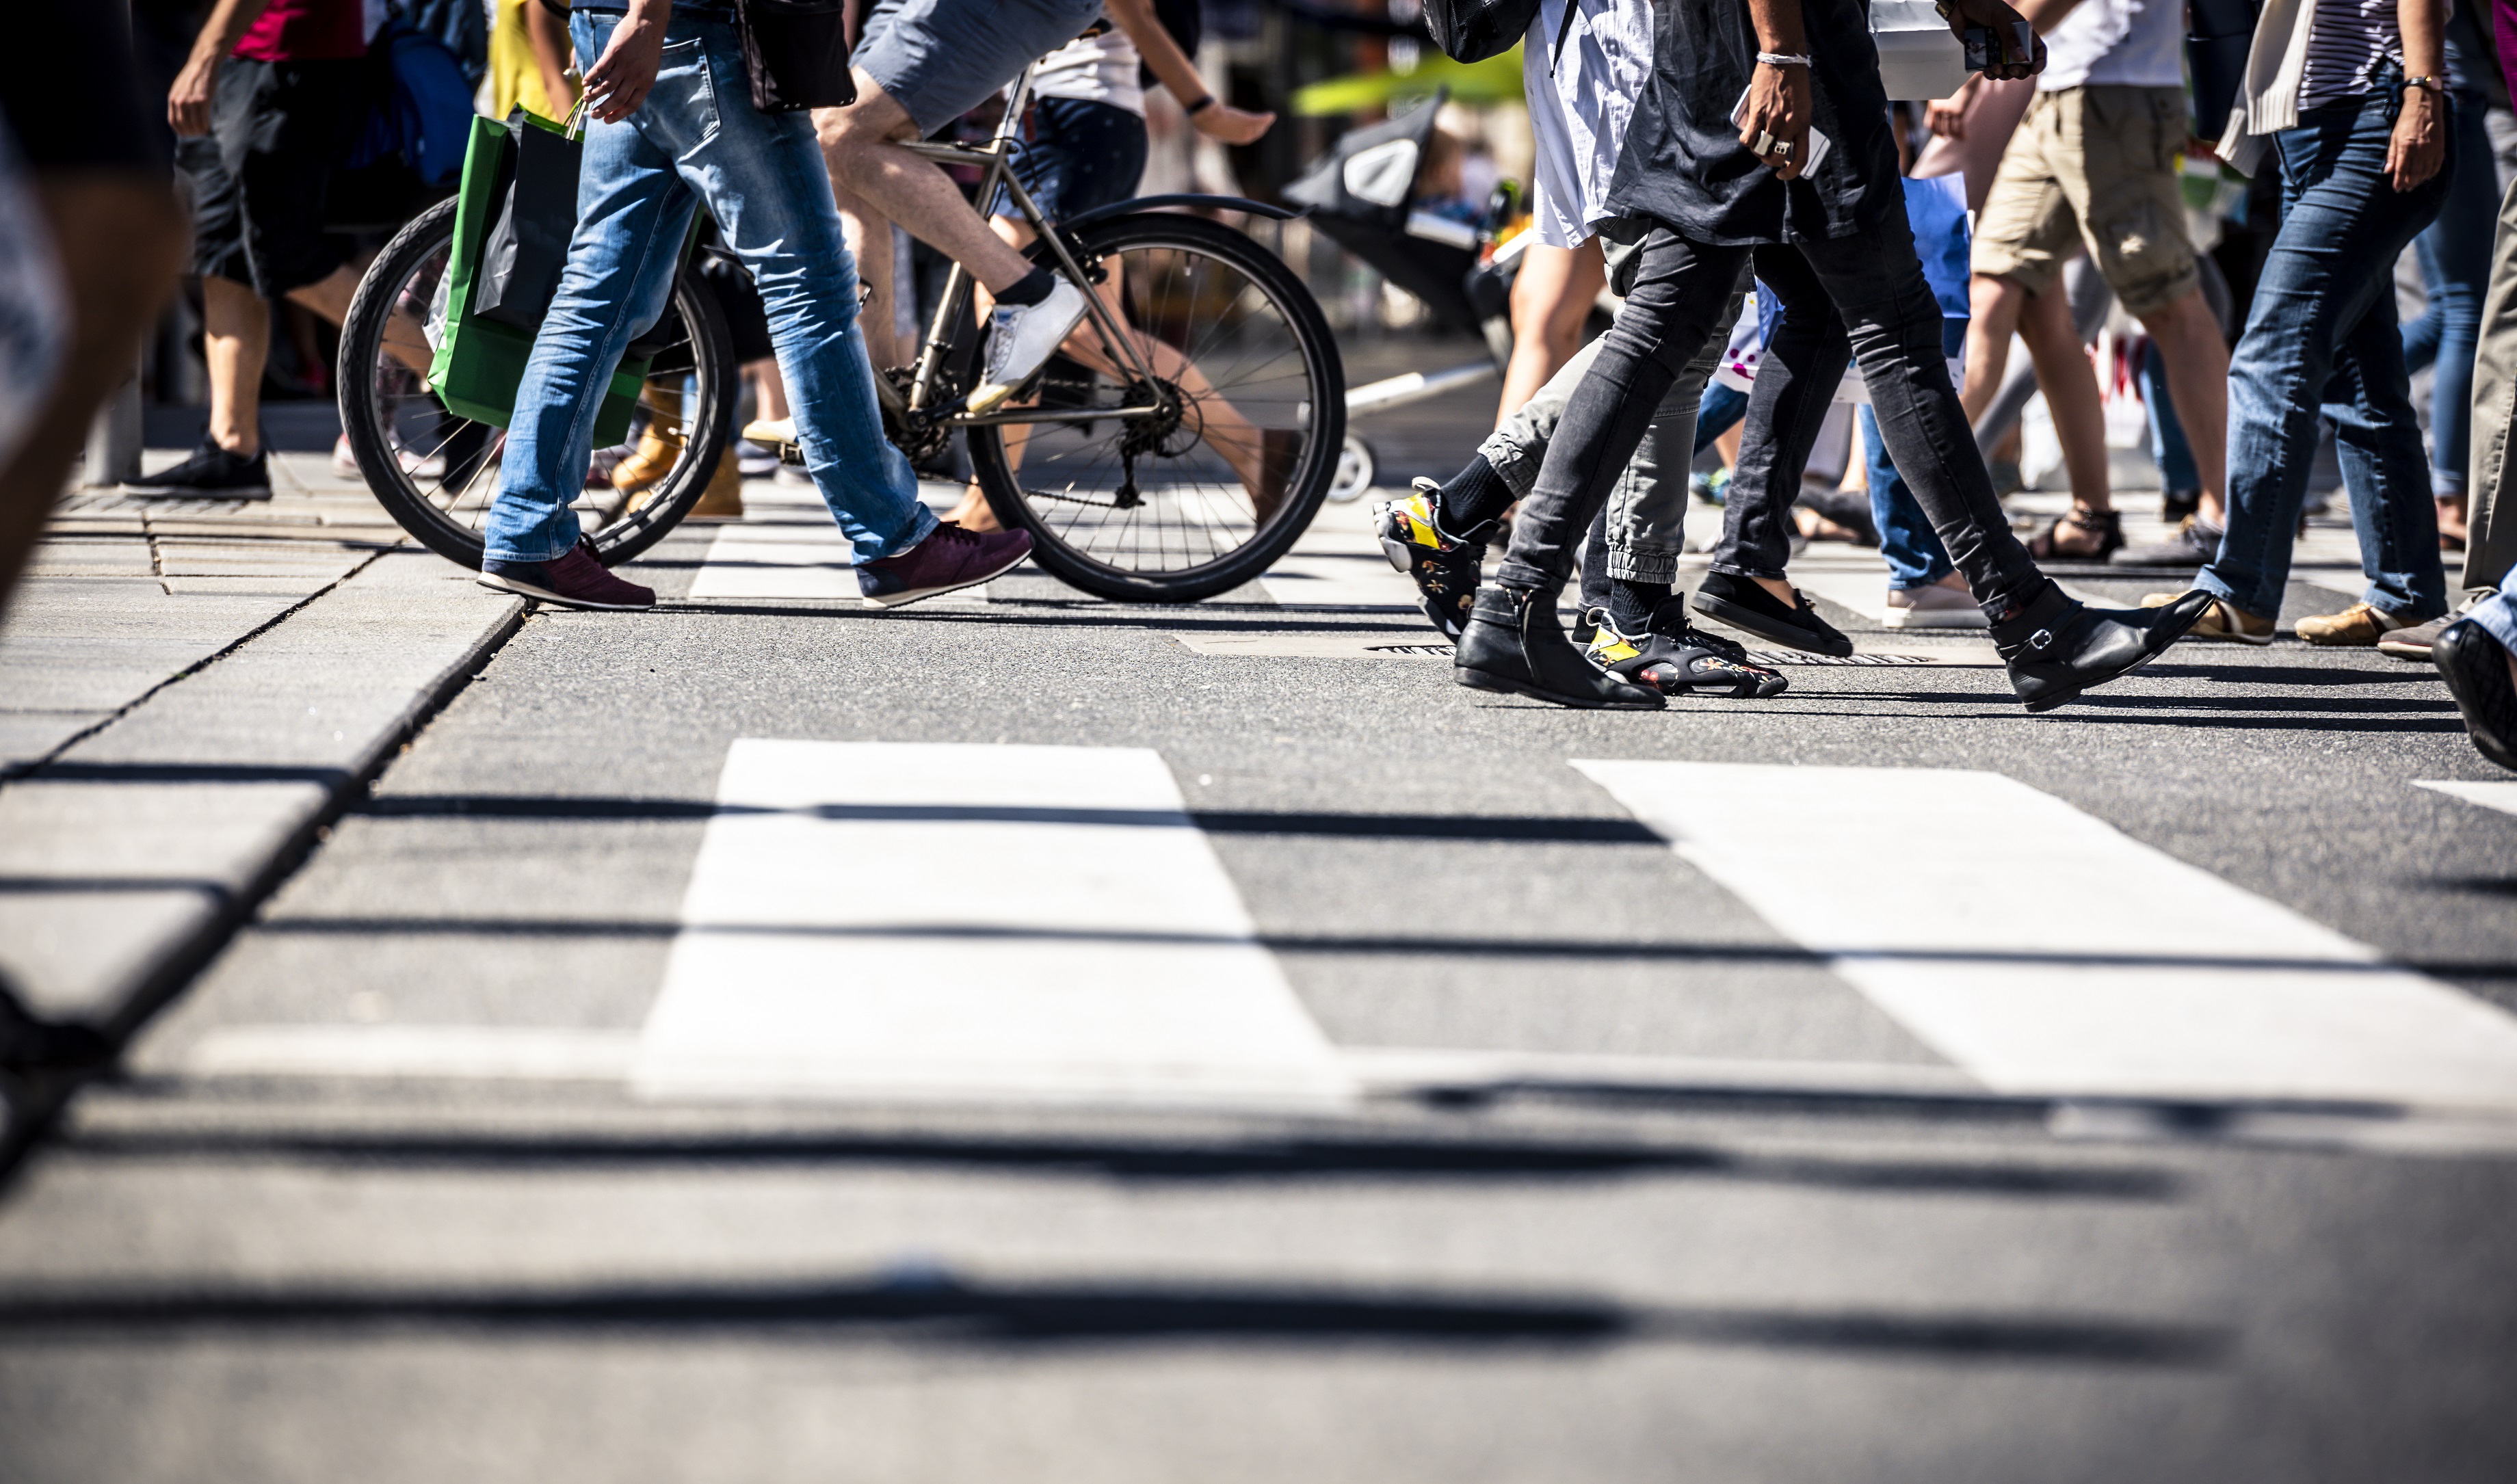 Pedestrians and bicyclists in a crosswalk